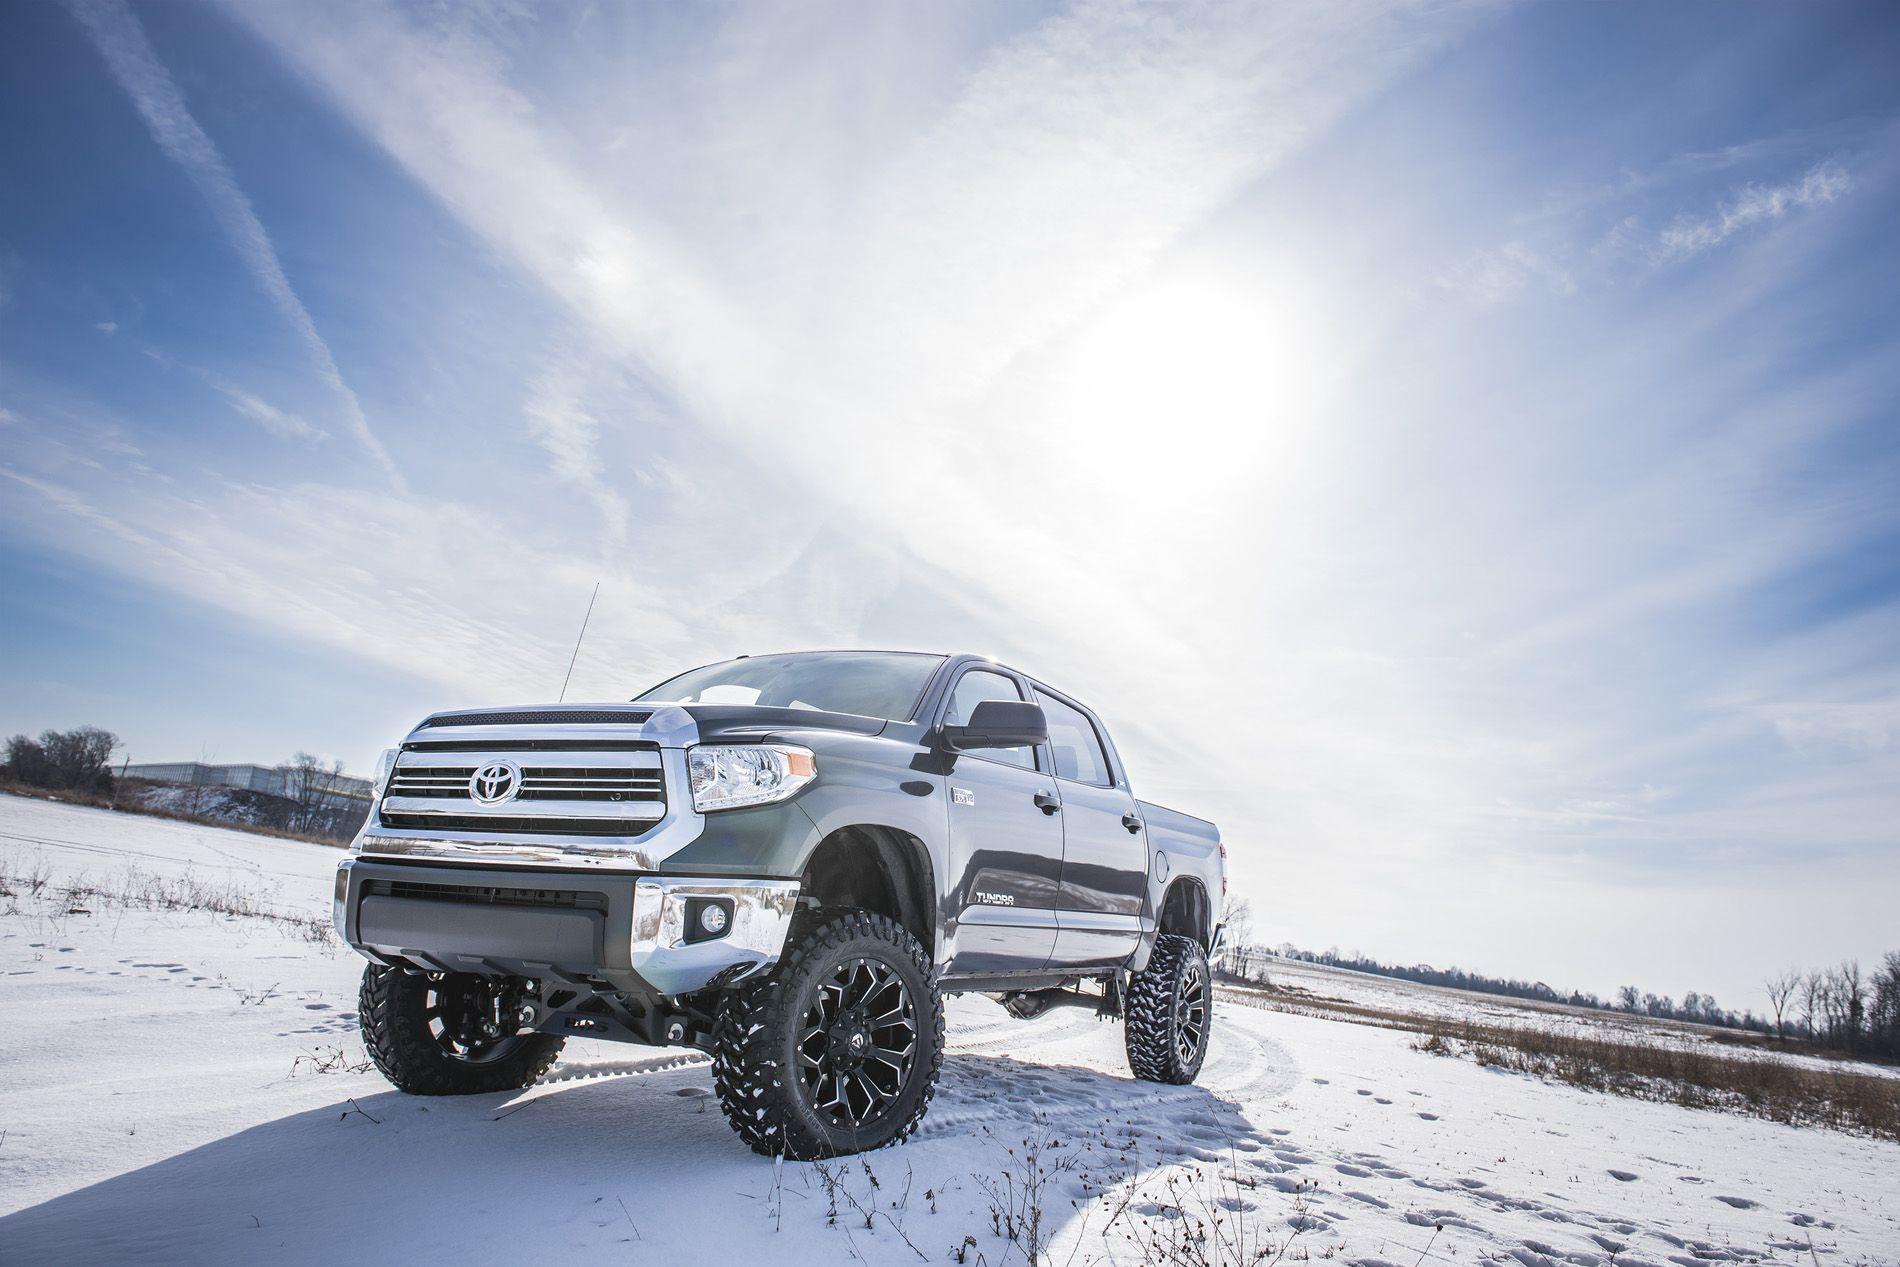 Toyota Tundra Wallpapers Top Free Toyota Tundra Backgrounds Wallpaperaccess